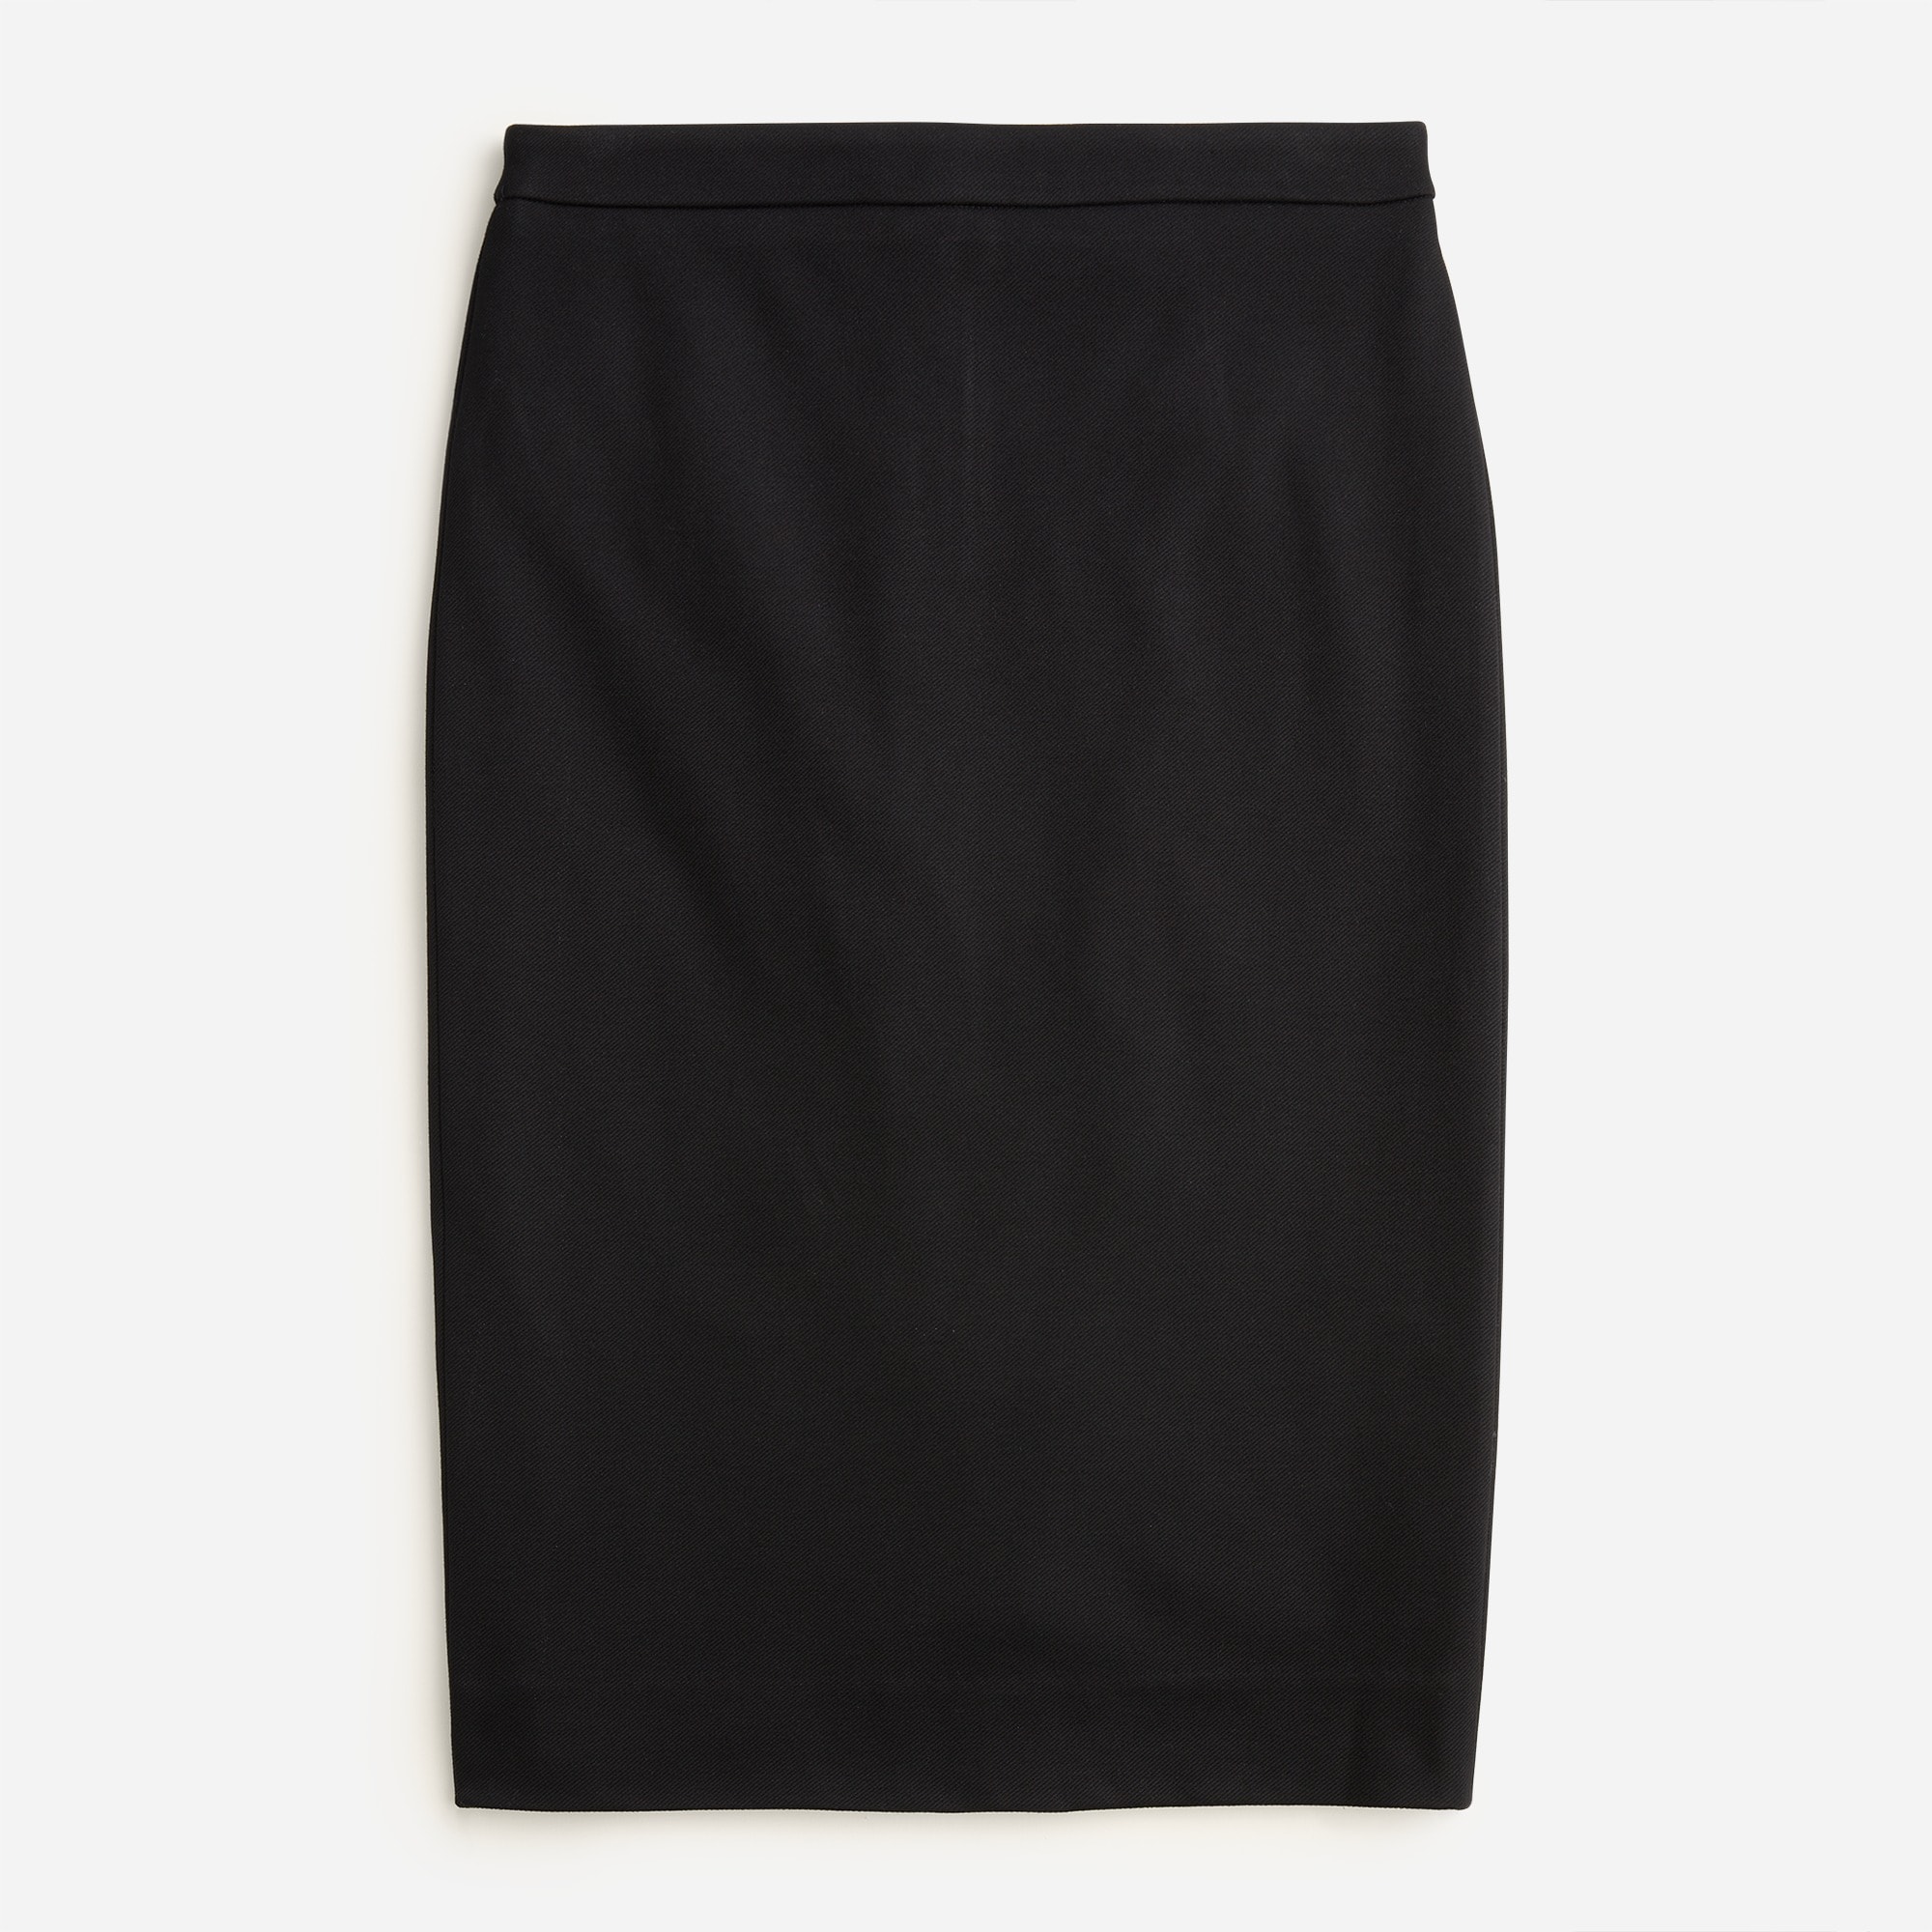 J.Crew: No. 2 Pencil® Skirt In Stretch Twill For Women